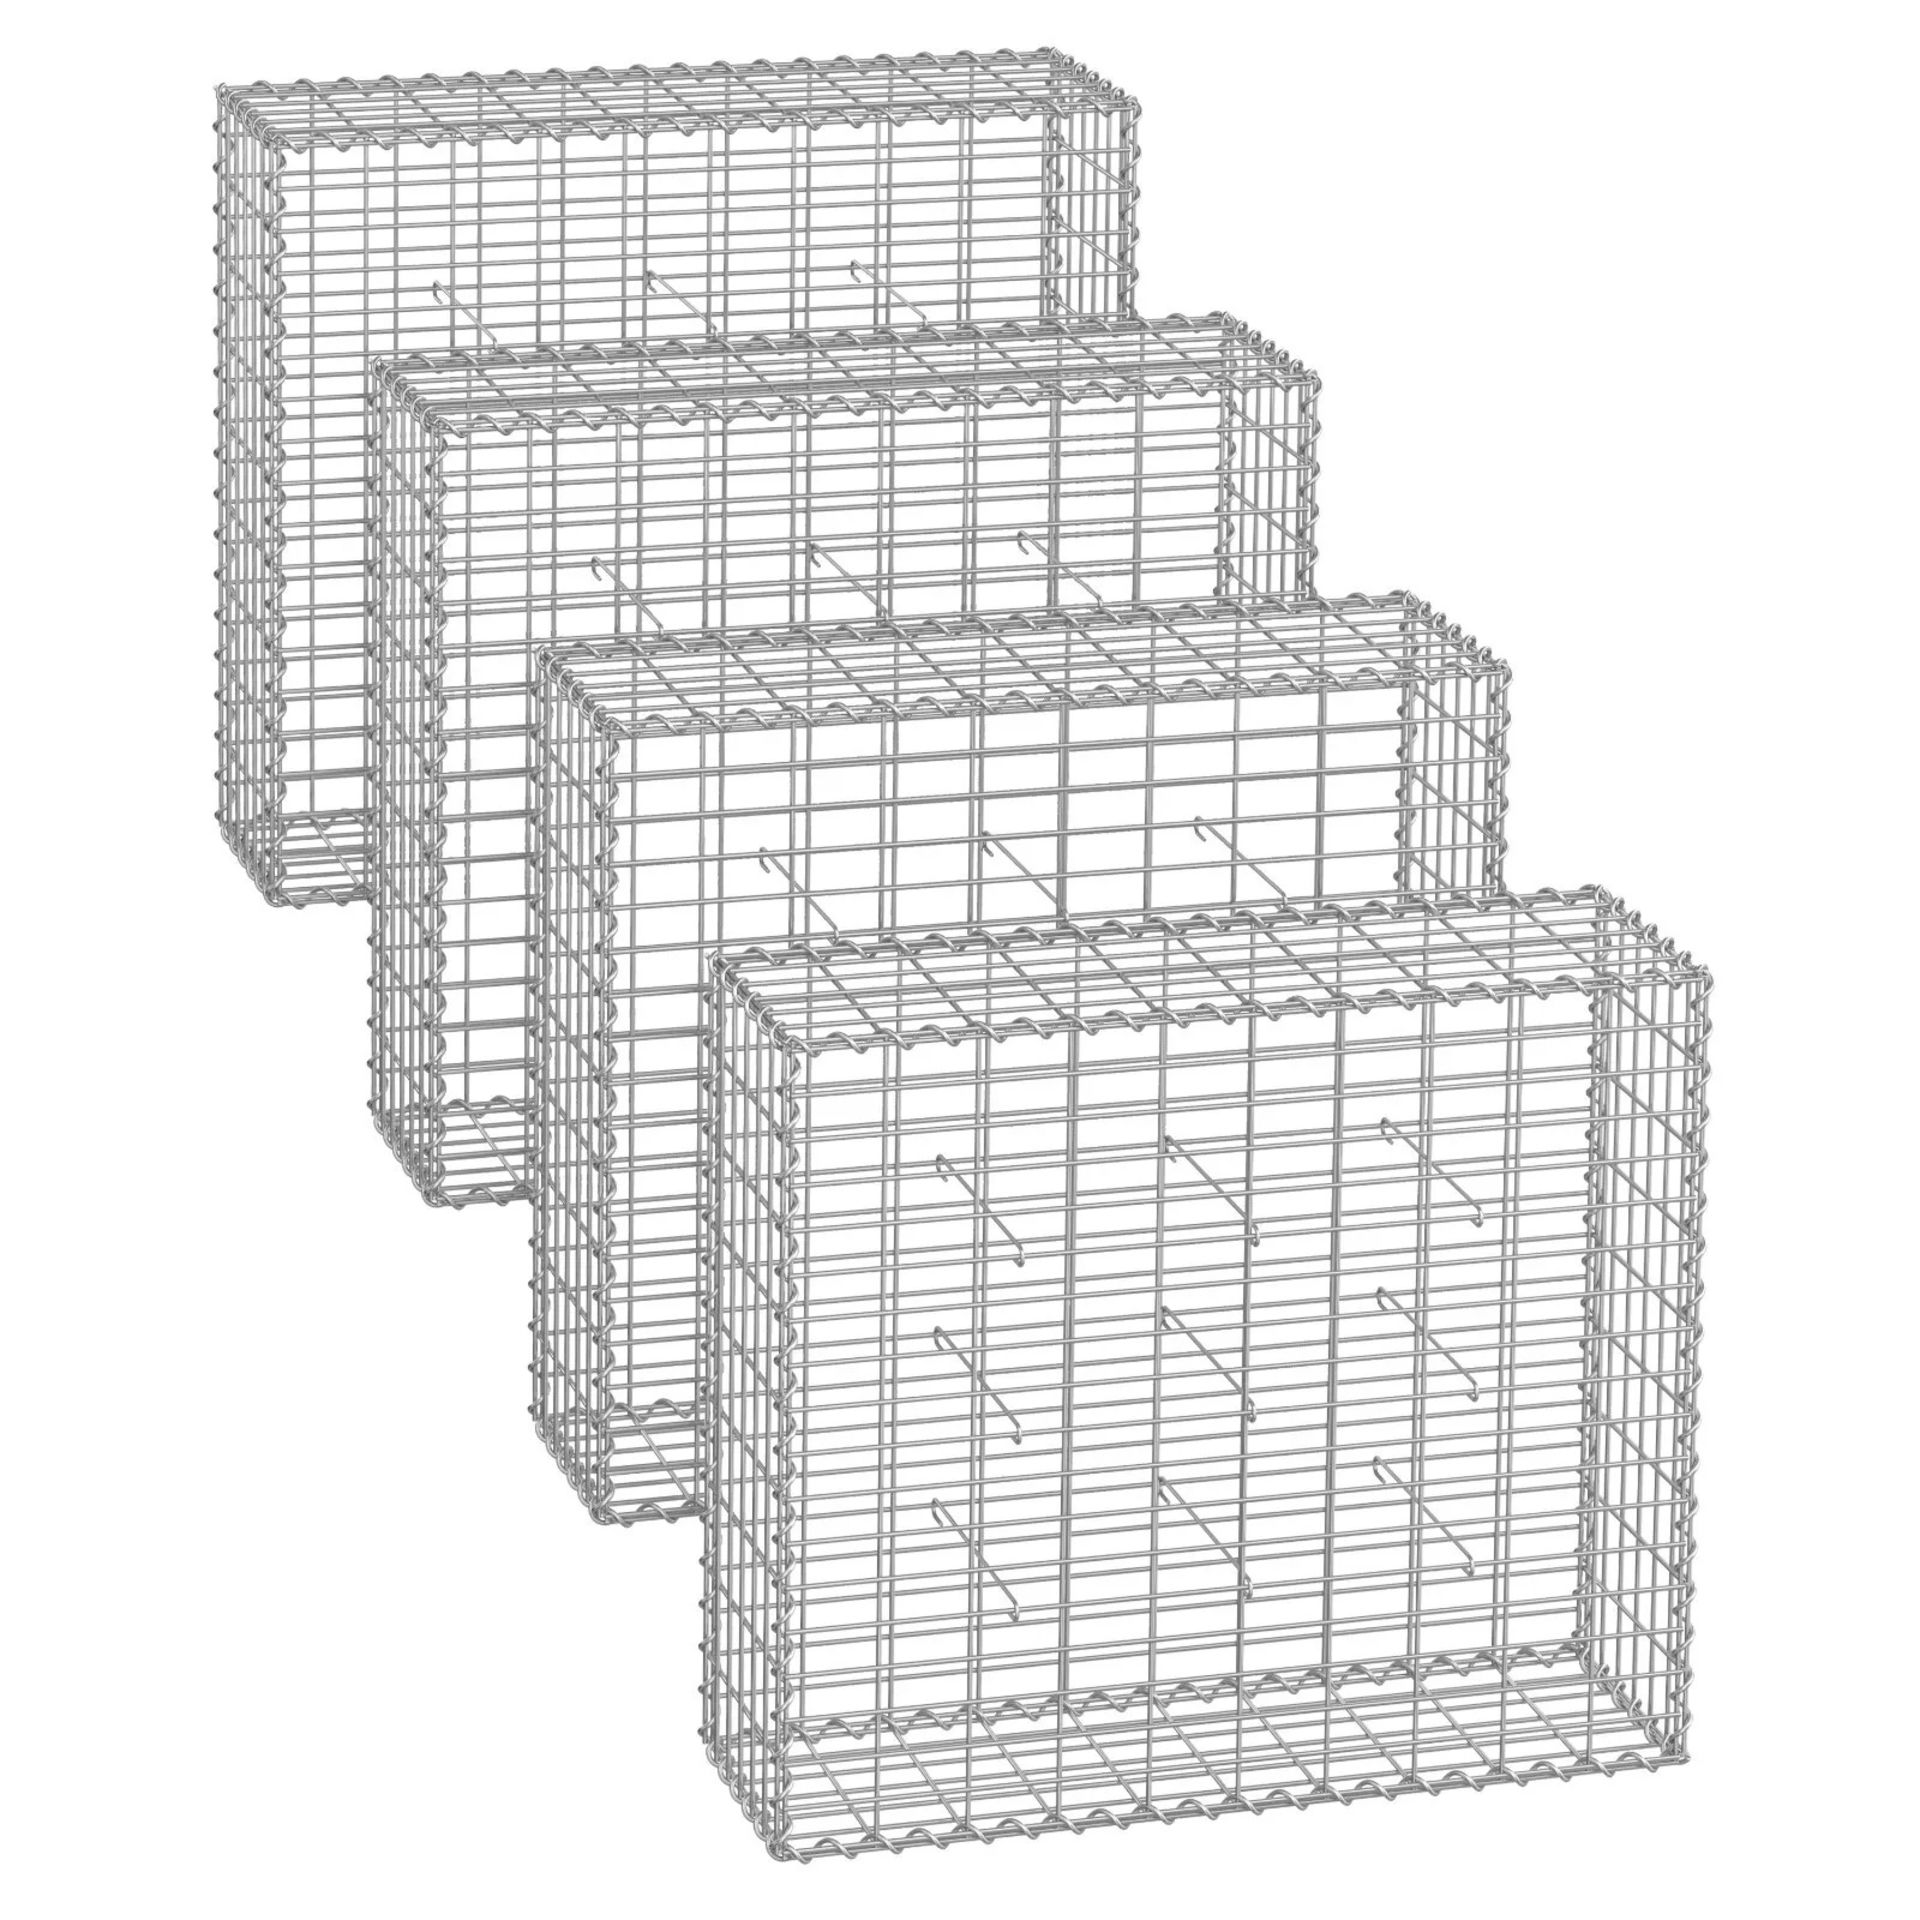 FREE DELIVERY - BRAND NEW ABION BASKETS GARDEN DECOR WALL PARTITION 100 X 90 X 30 CM SET